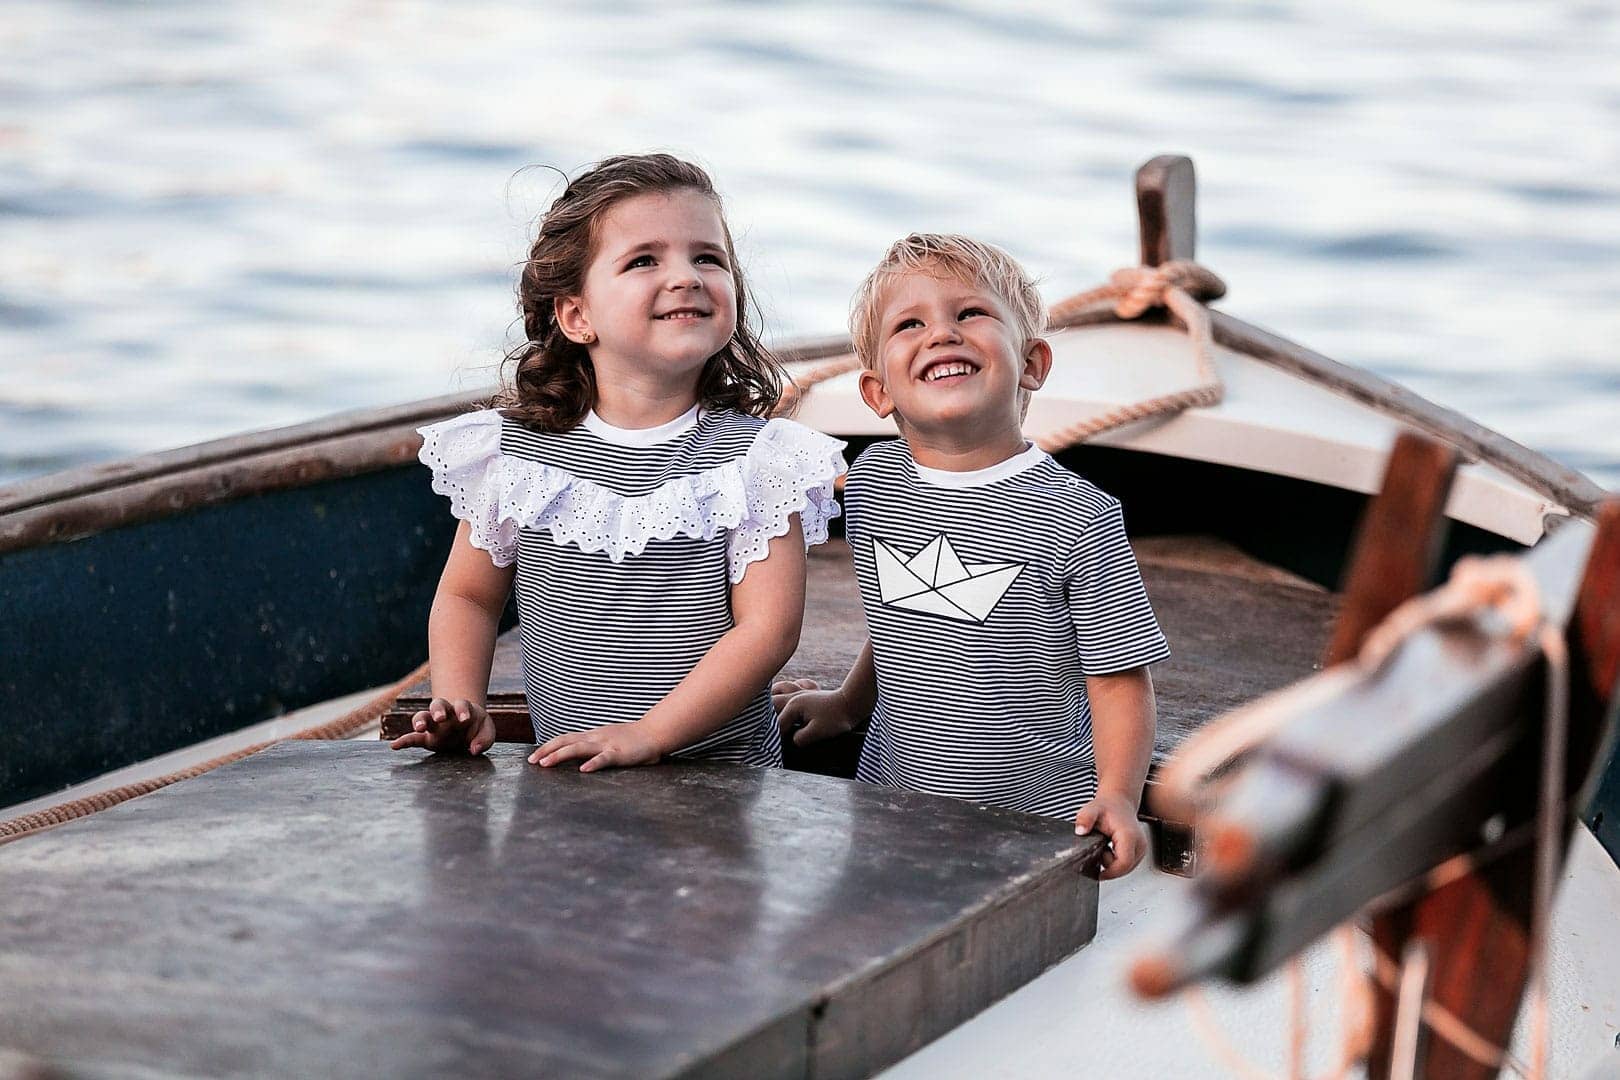 photograph of two smiling children playing on a boat wearing a blue striped T-shirt on a jetty in Ibiza.